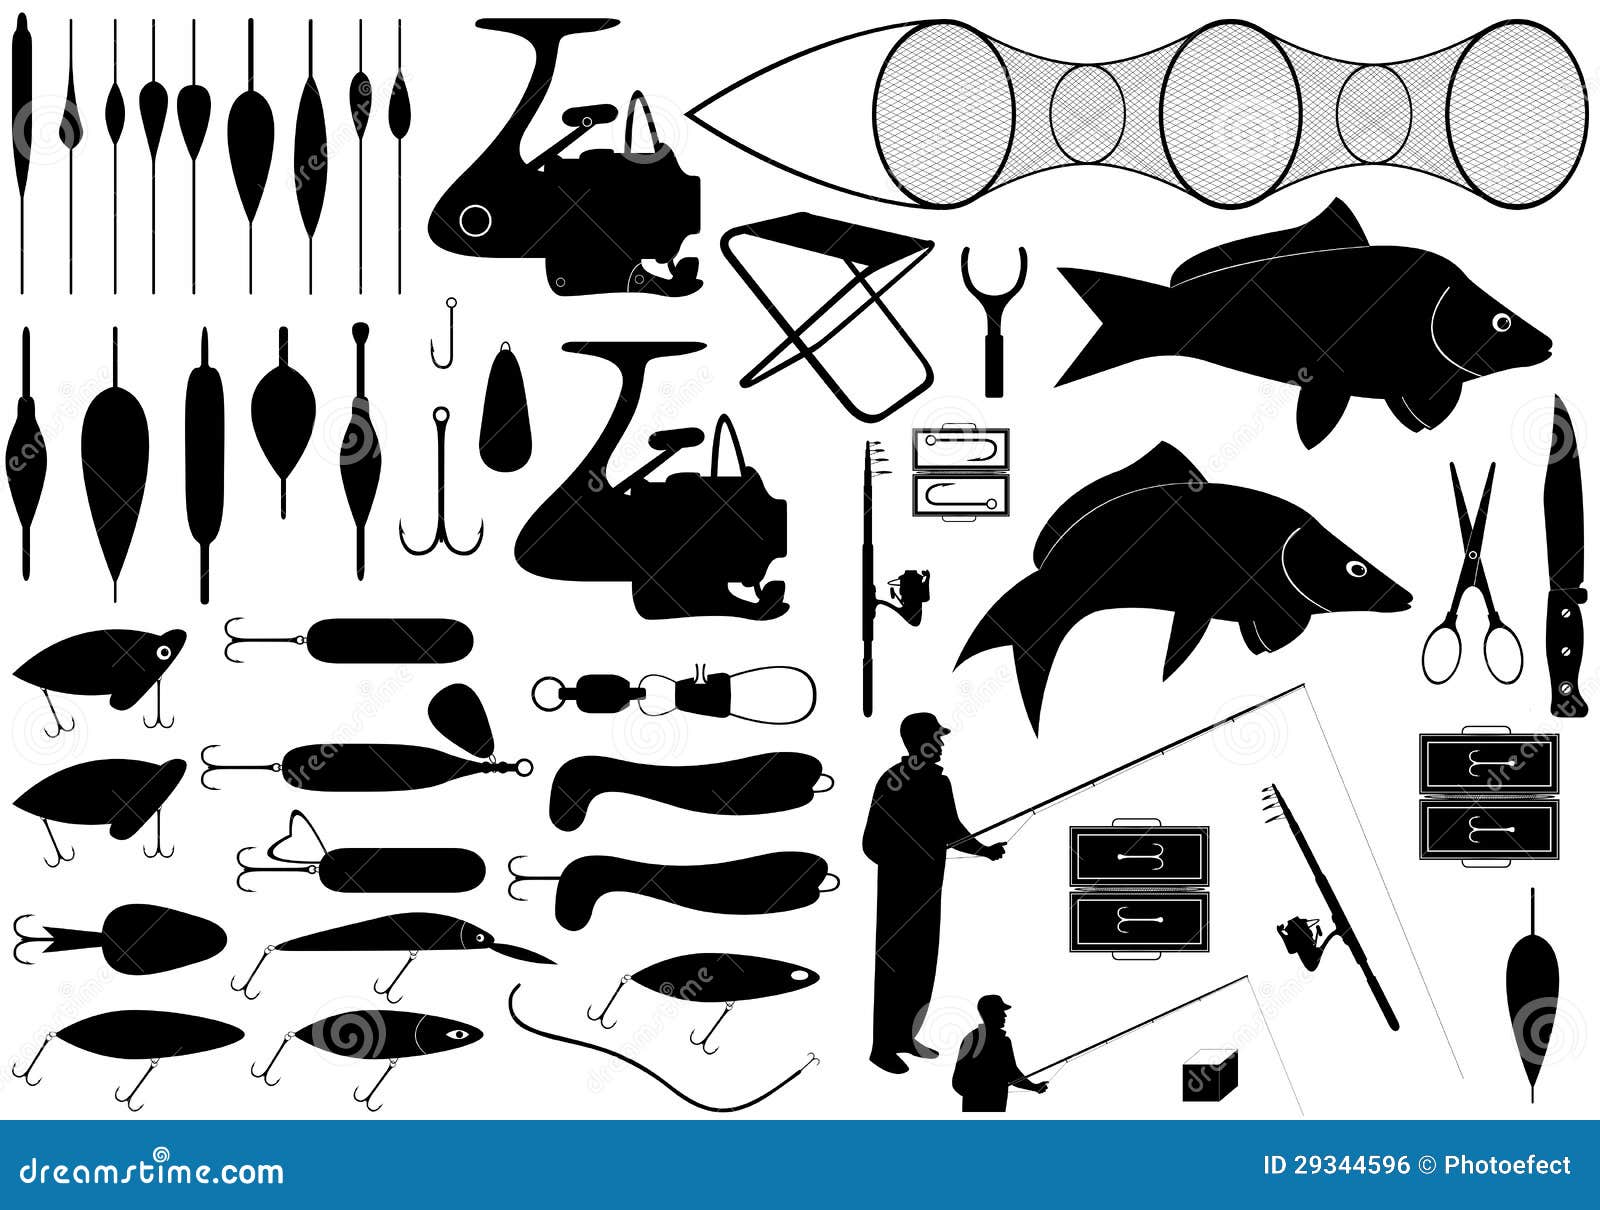 Fishing tools stock vector. Illustration of lure, people - 29344596